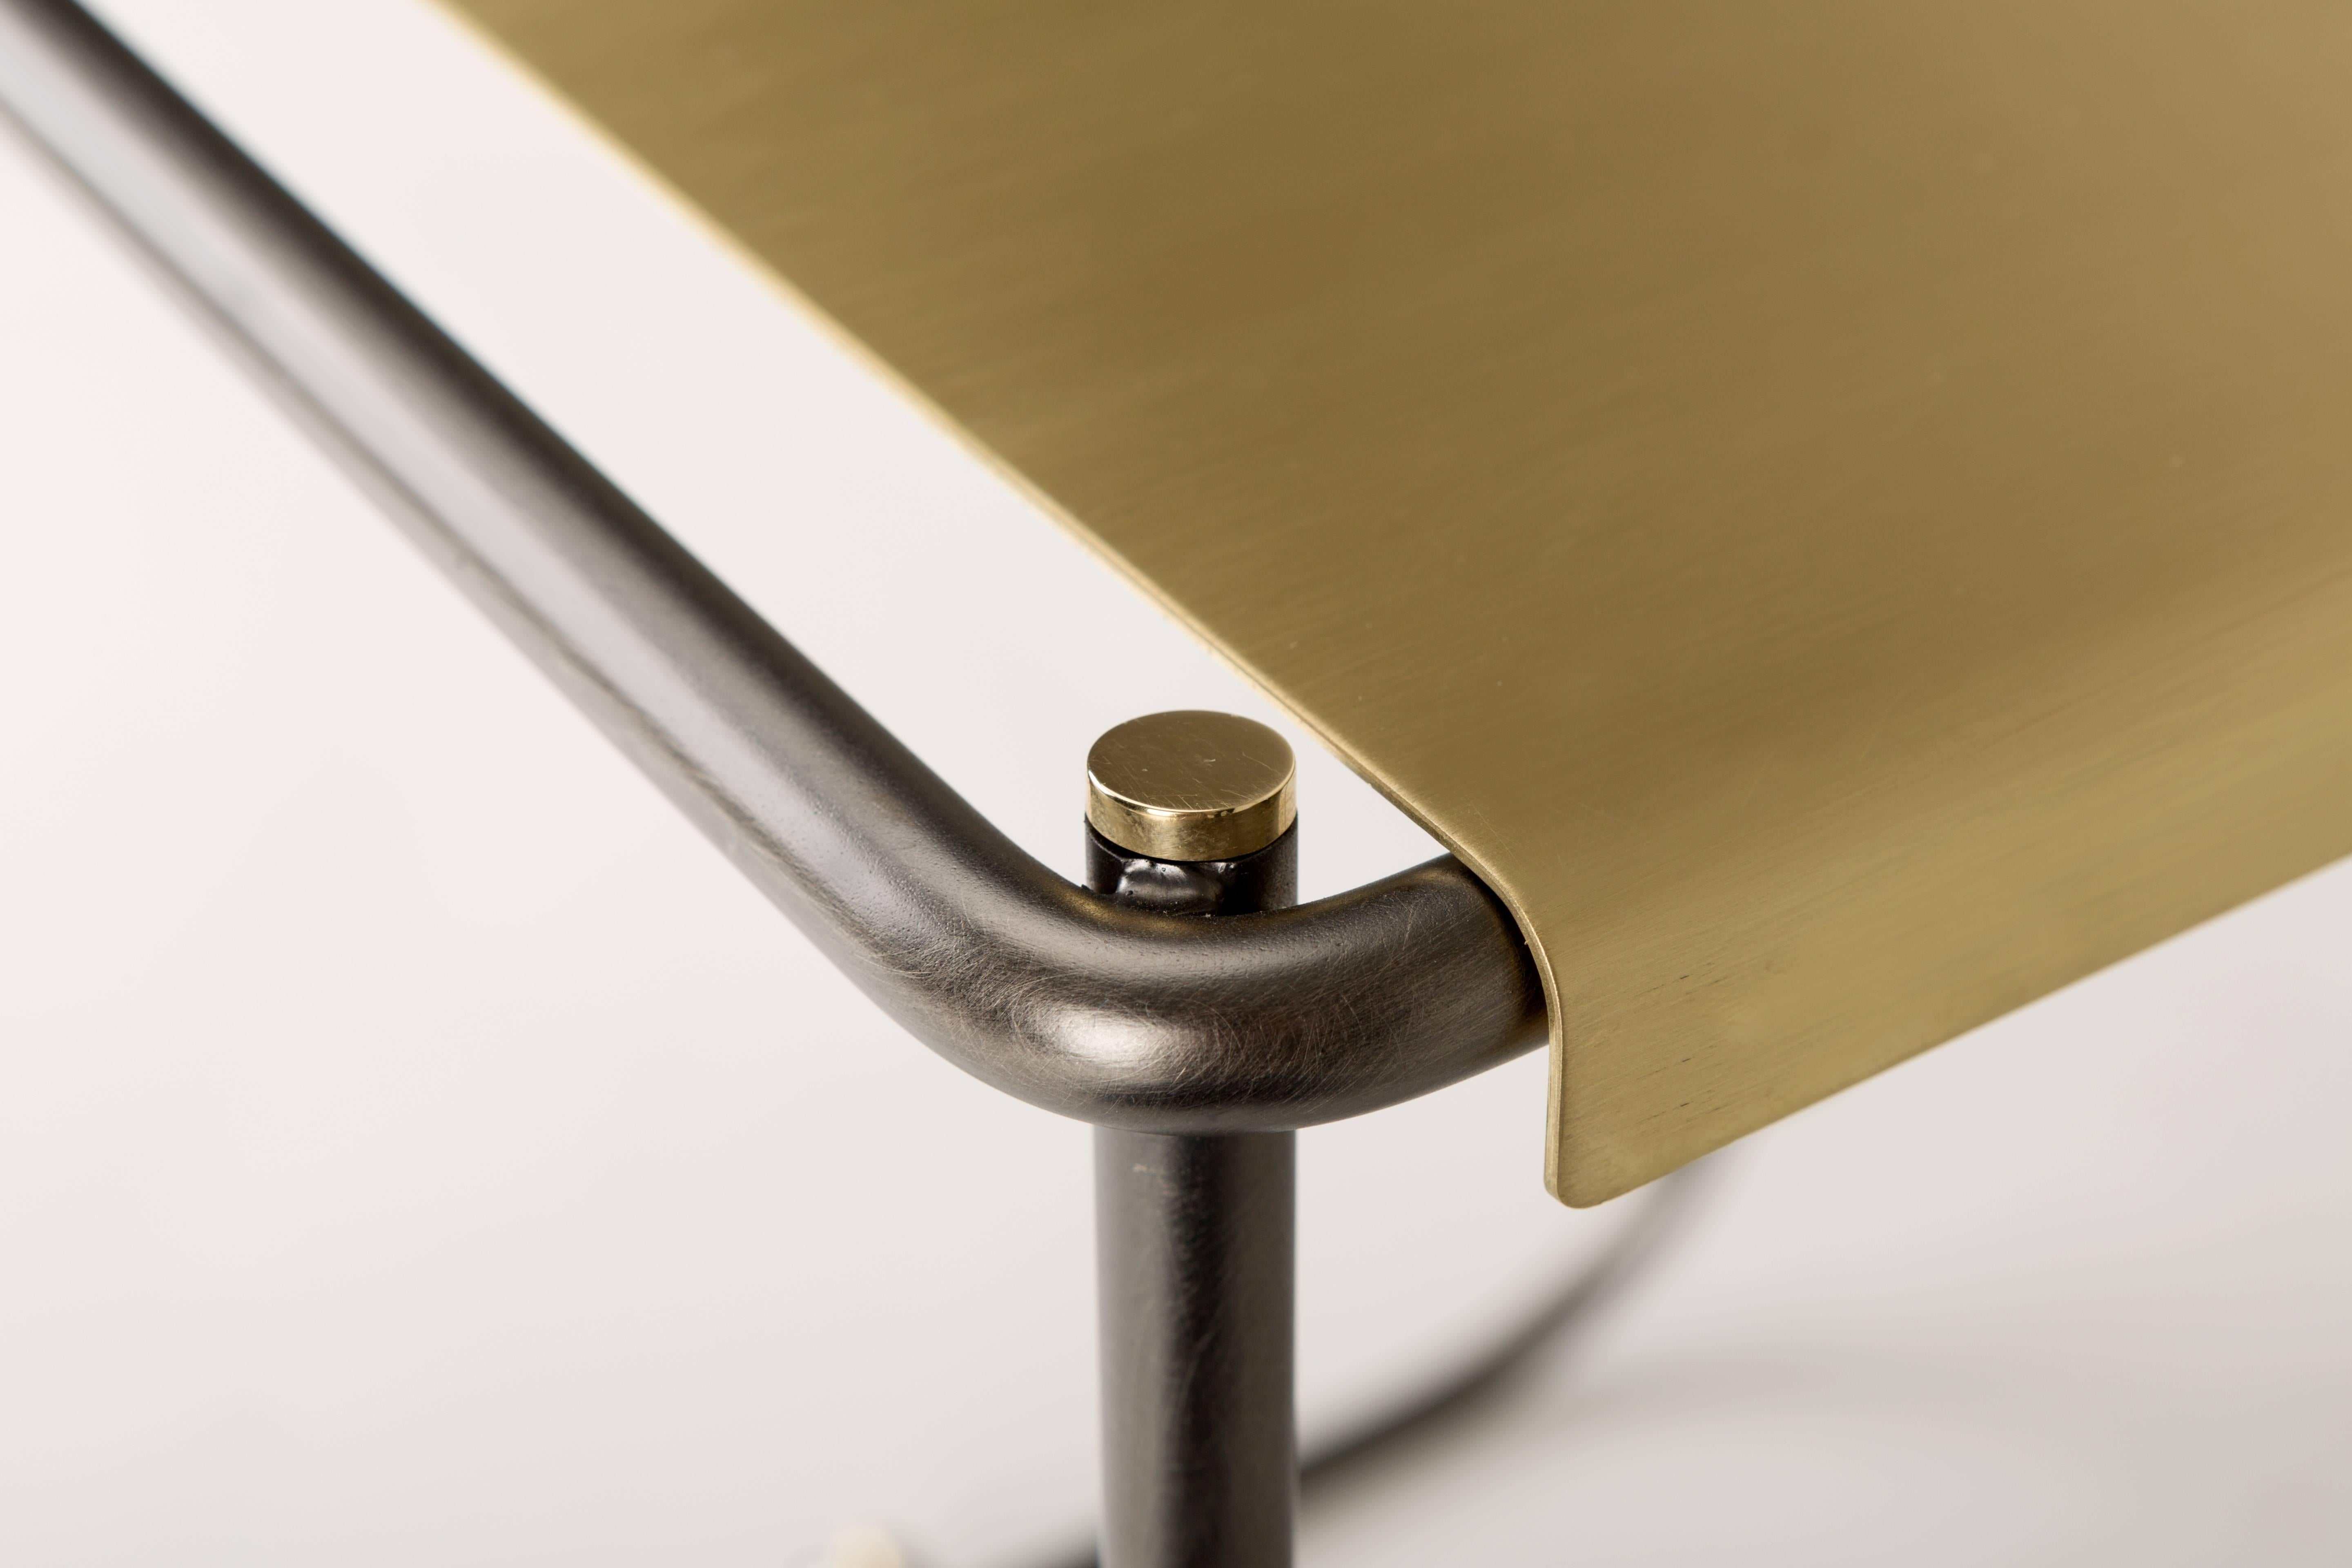 A bent metal tube surrounds the seat made from a galvanised plate with a brushed finish. Brass screws at the end of the tubes enrich its simple shape.

Materials: bent metal tube structure and natural brass seat
Dimensions: cm 38 x 36.5 x 46.5.